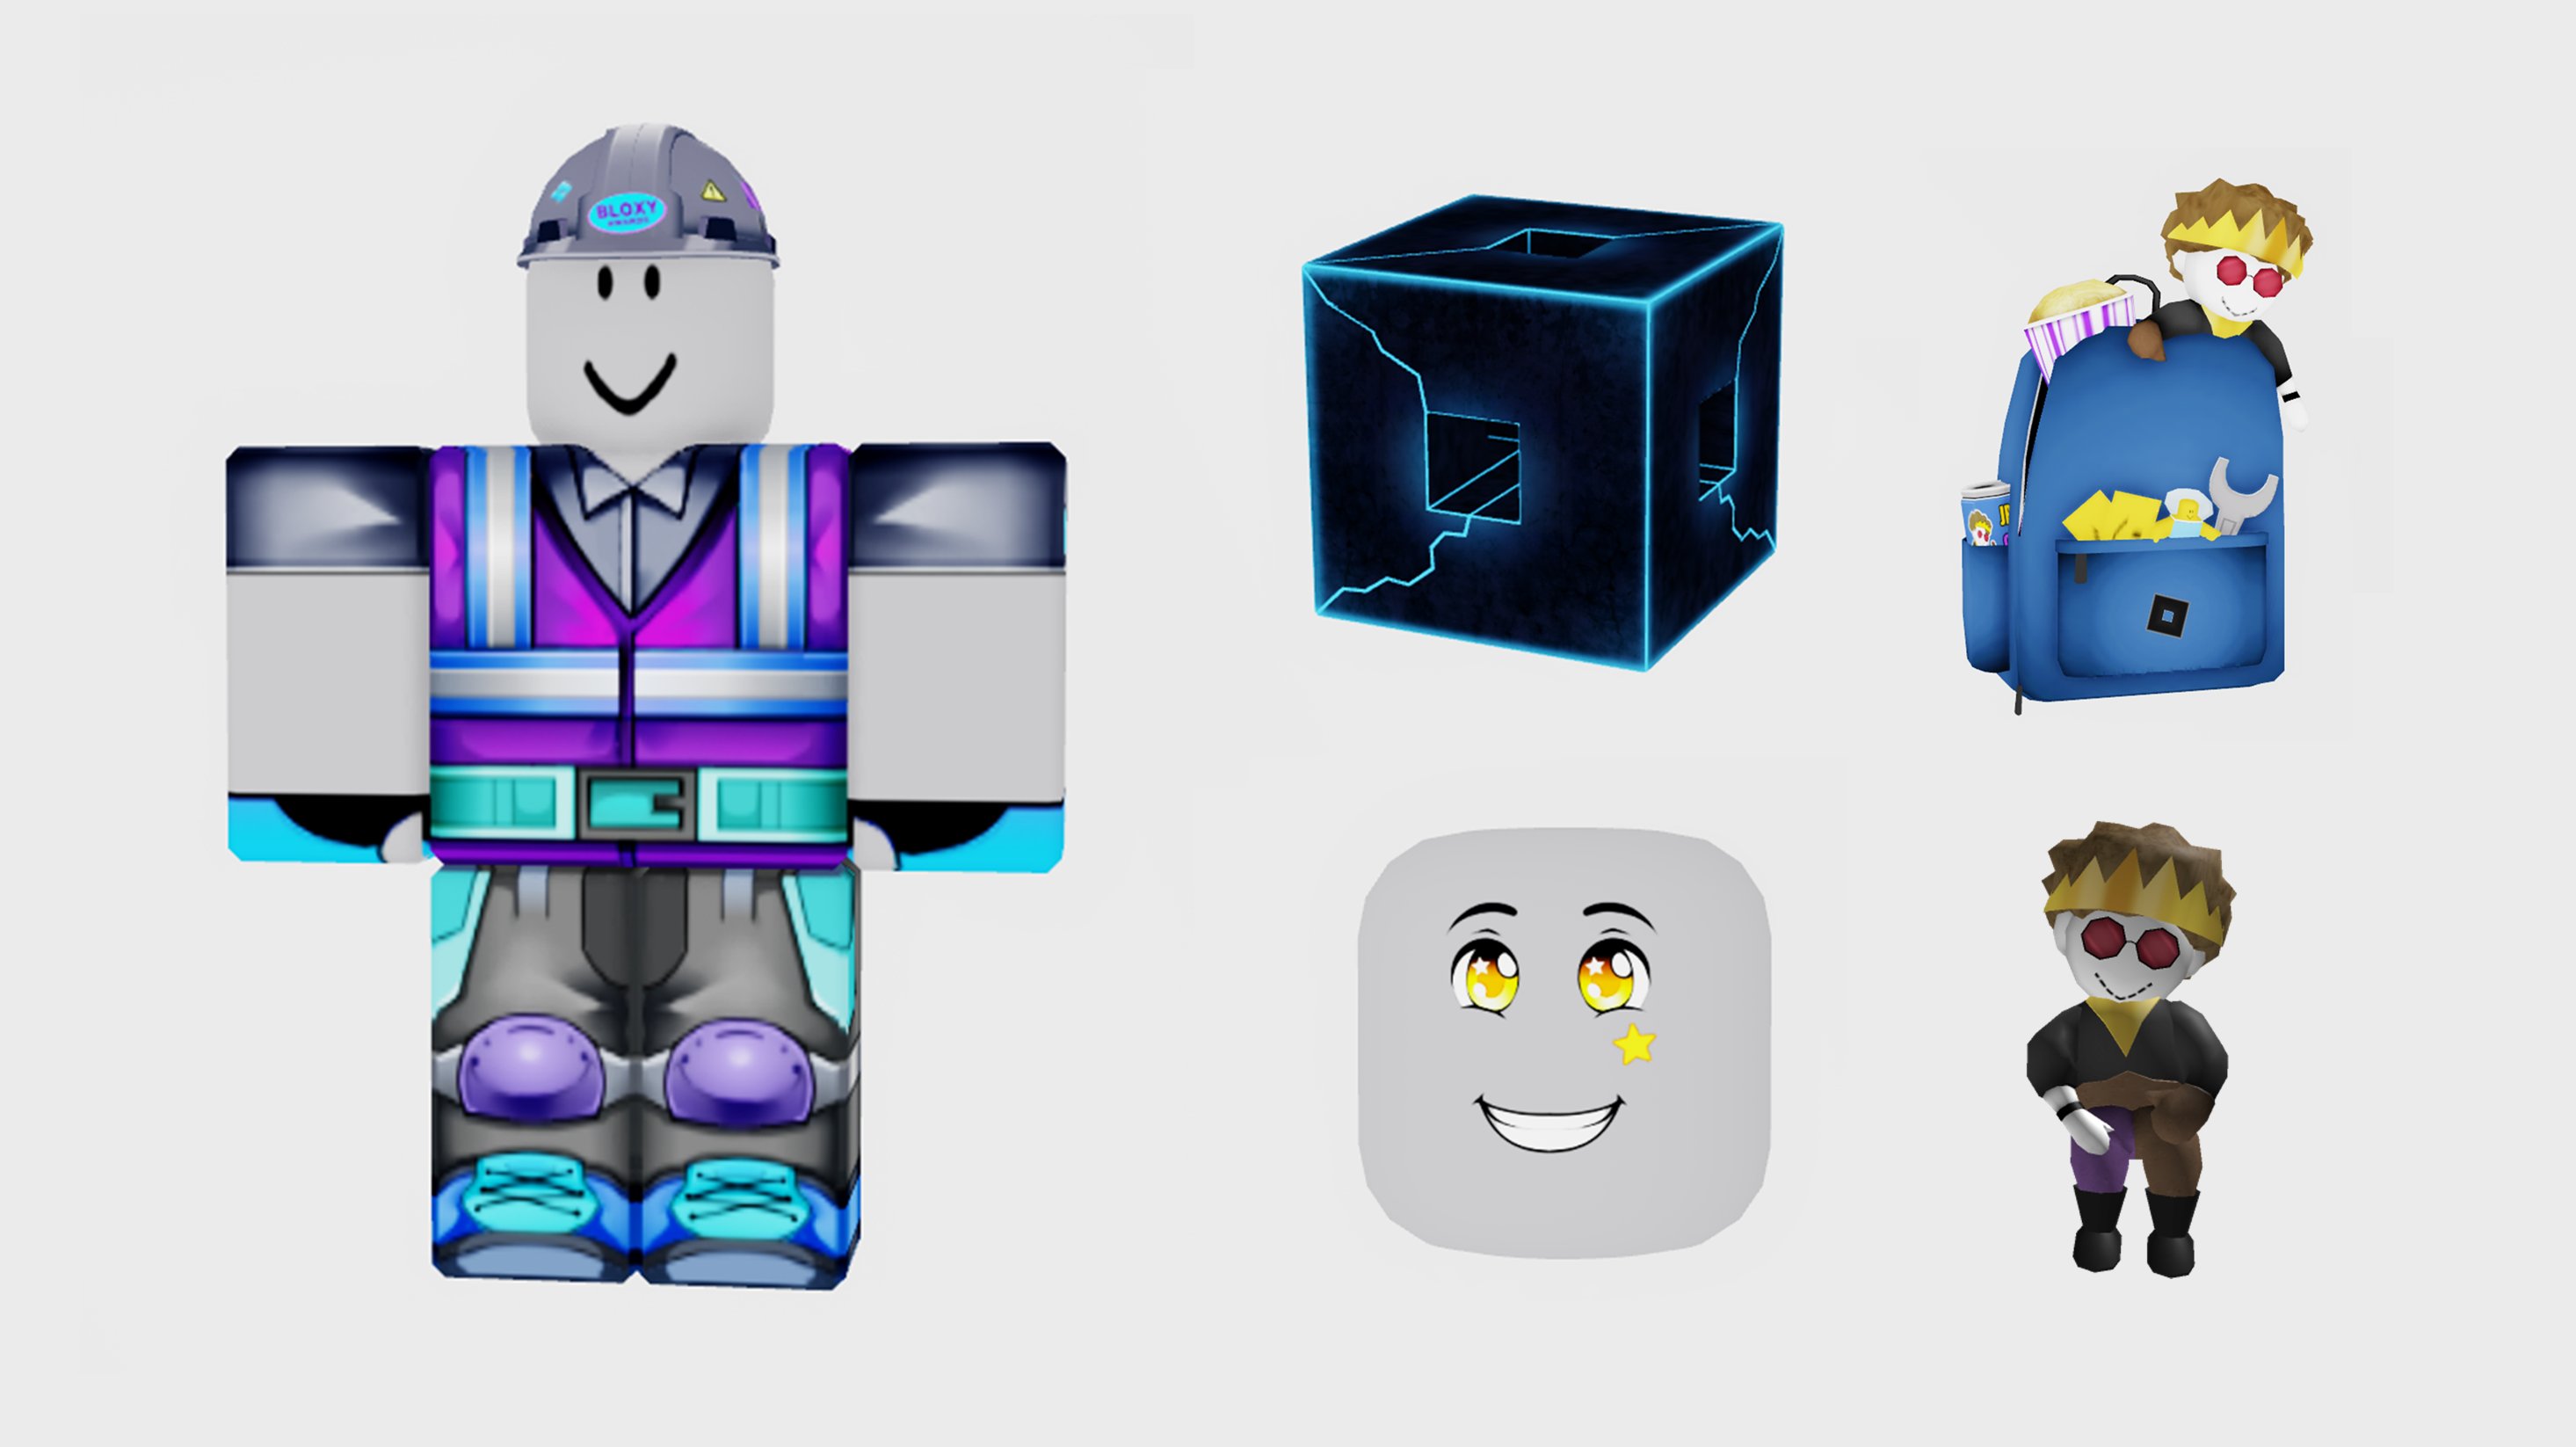 Roblox on X: VotreKaramby has the blueprints to a fashionable AND